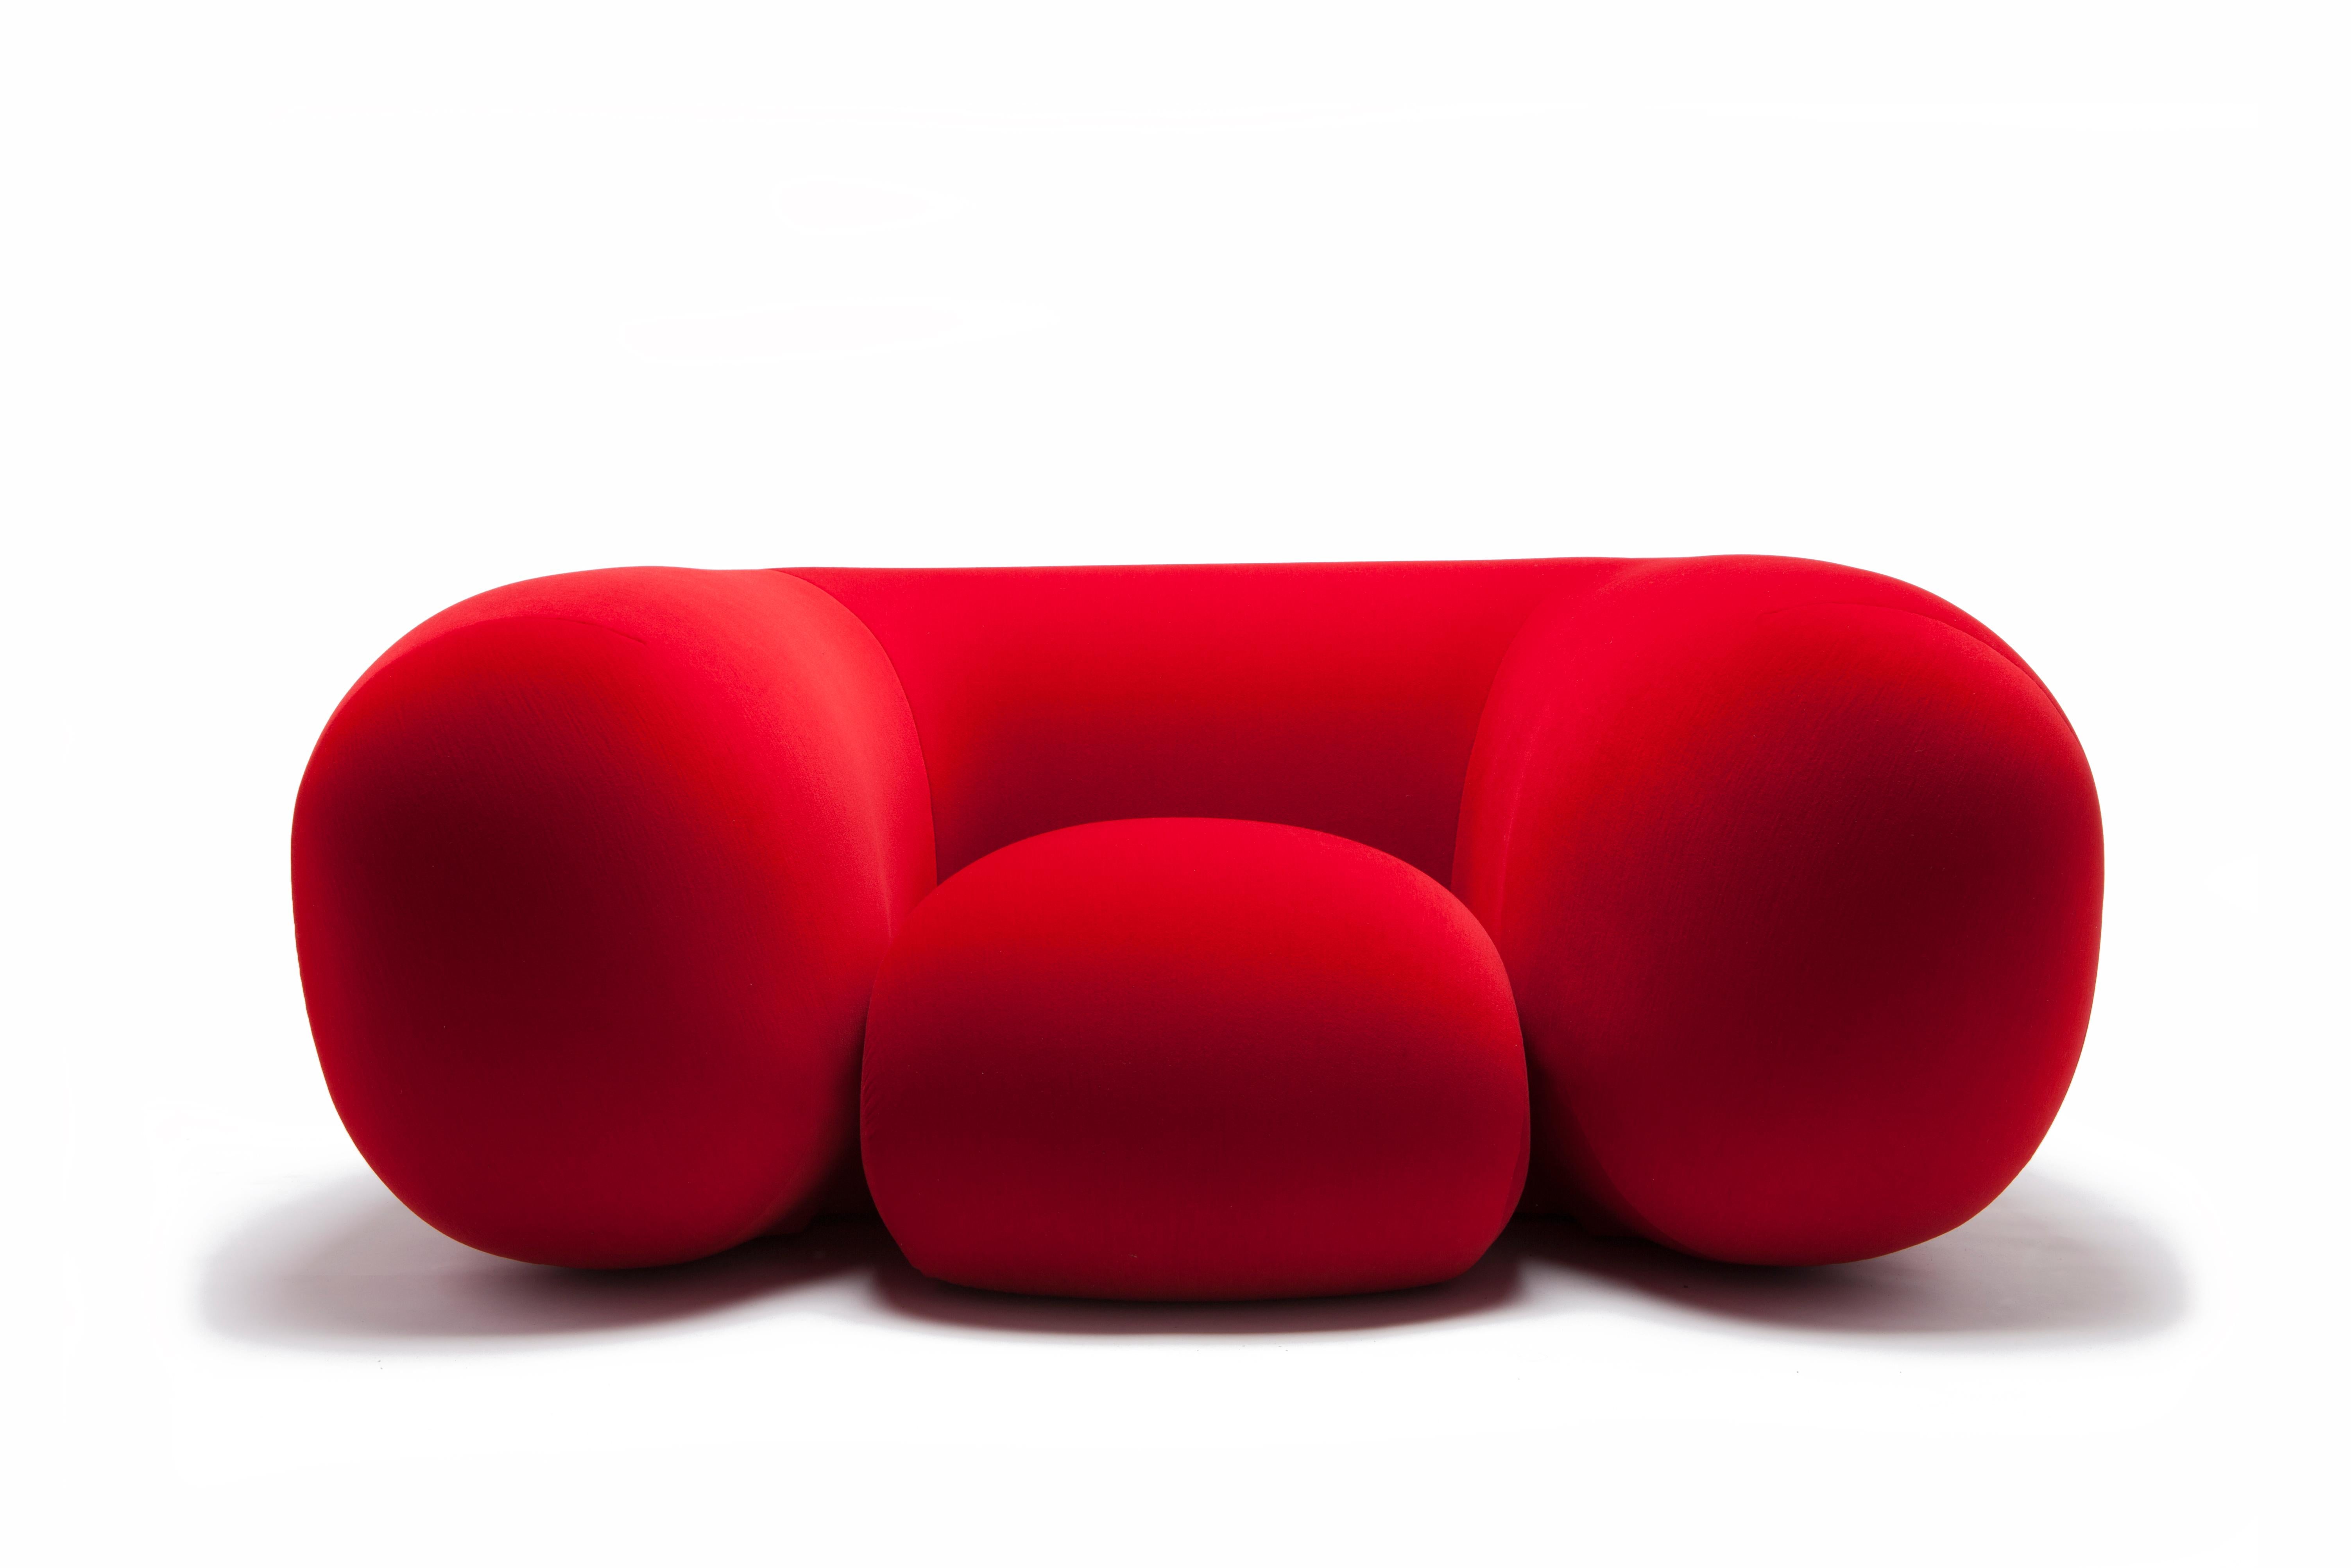 Composed entirely of foam, without any hard internal structure, Mollo’s simple form provides exceptional comfort and the ultimate relaxation experience. Comfortably seating seven, one on the seat and two on each of the three sides, the Mollo’s size